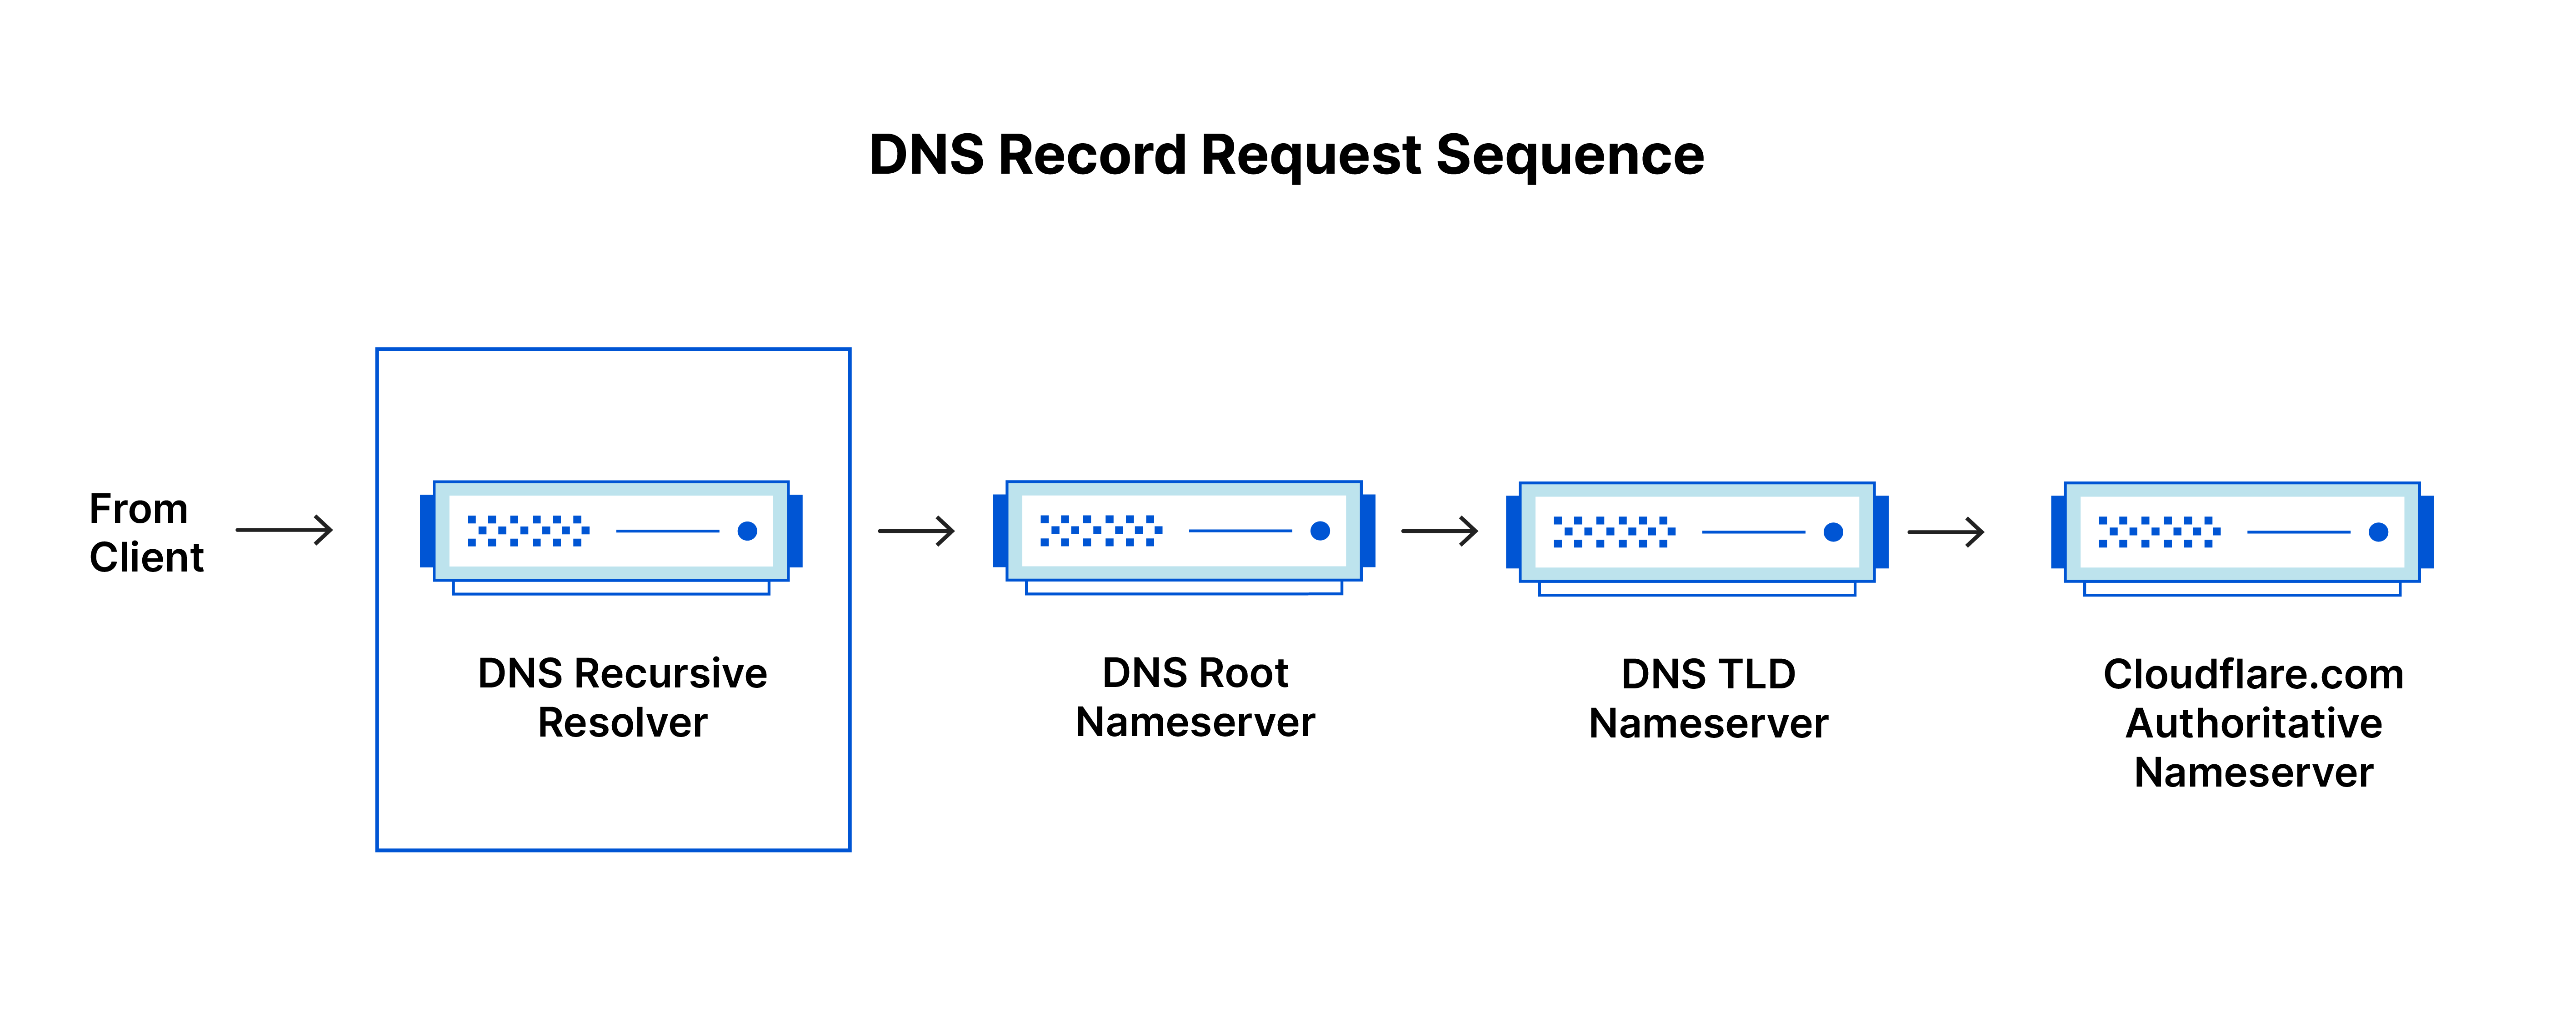 DNS Record Request Sequence - DNS Recursive Resolver gets request from client